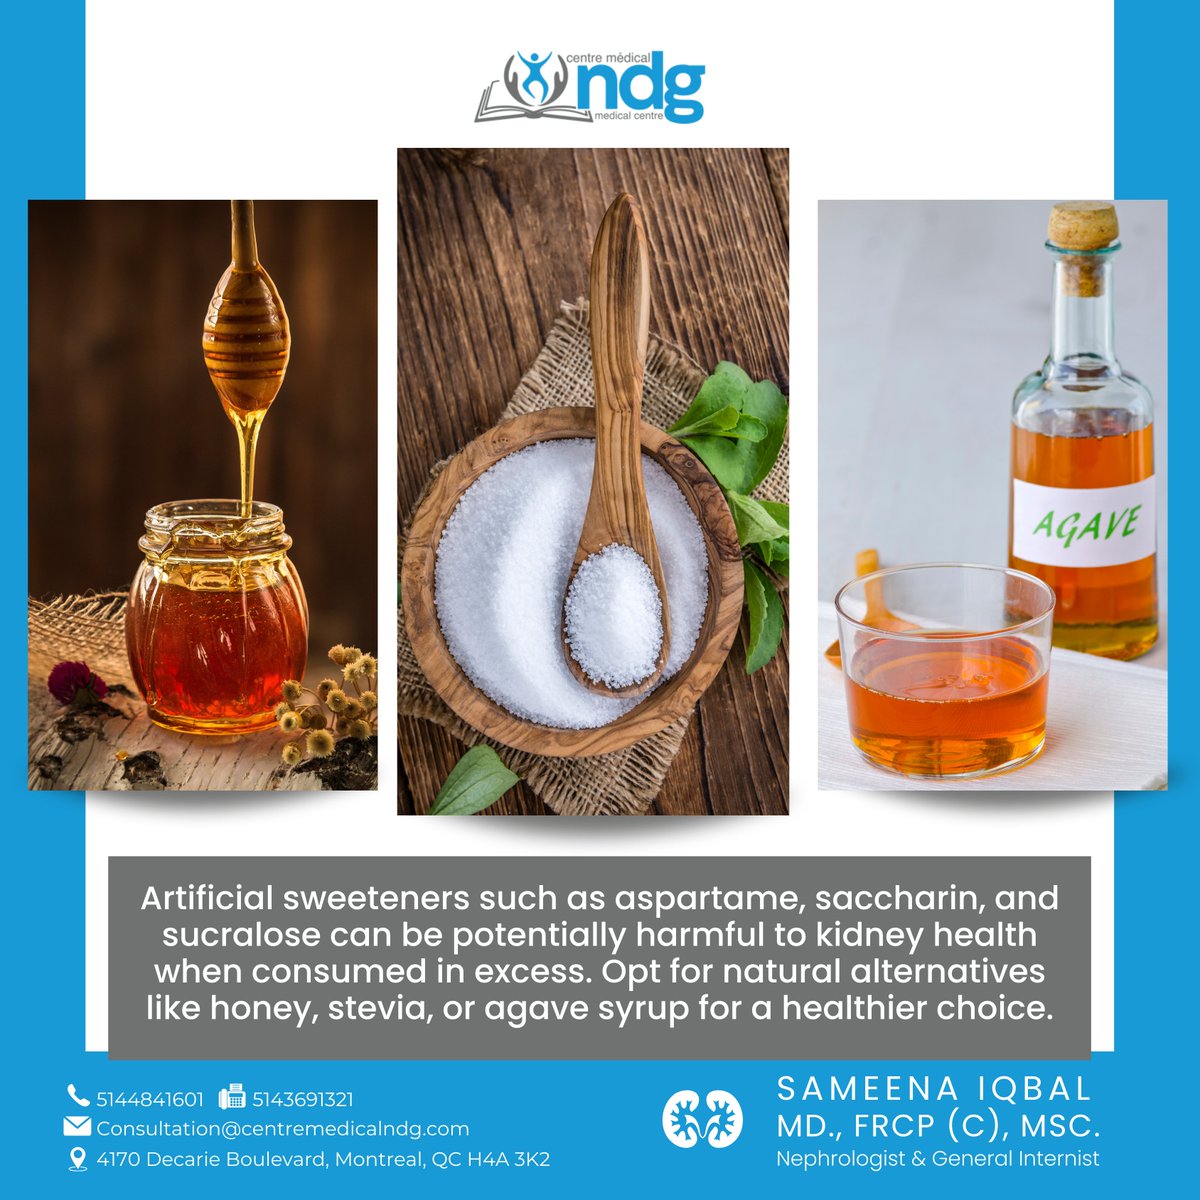 Be cautious with artificial sweeteners! Too much can negatively impact your kidney health. Opt for natural sweeteners when possible.

#SweetenerChoices #KidneyHealth #ArtificialSweeteners #NaturalSweeteners #HealthyLiving #HealthTips #WellnessCommunity #ShareYourChoice